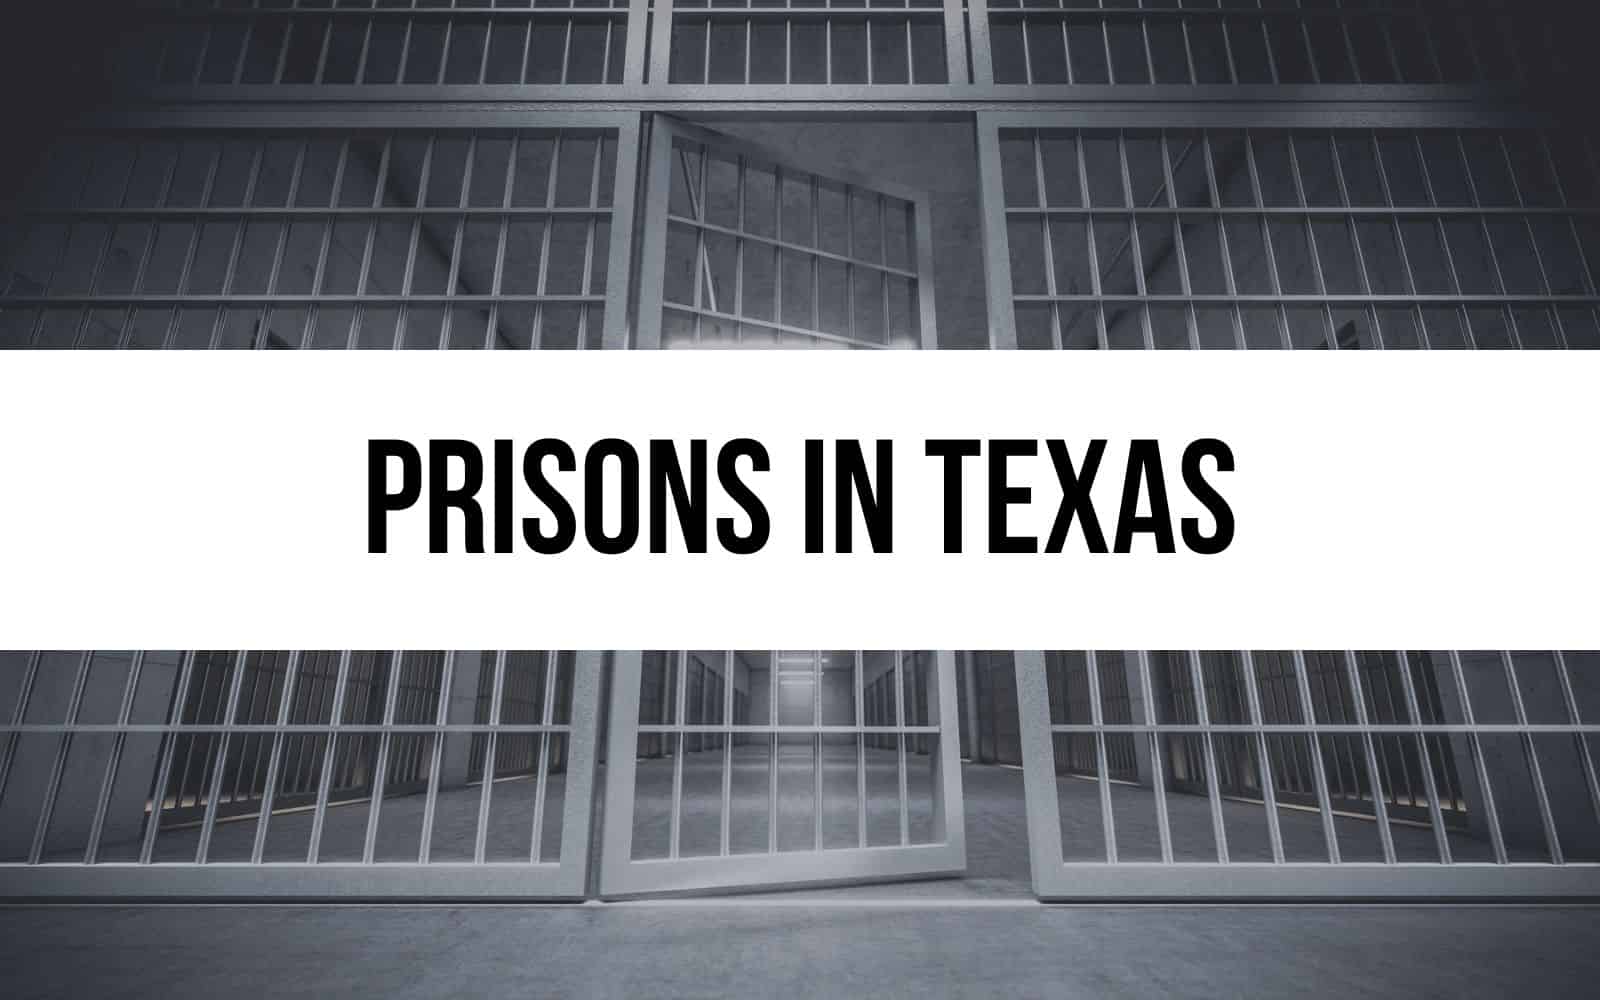 Prisons in Texas